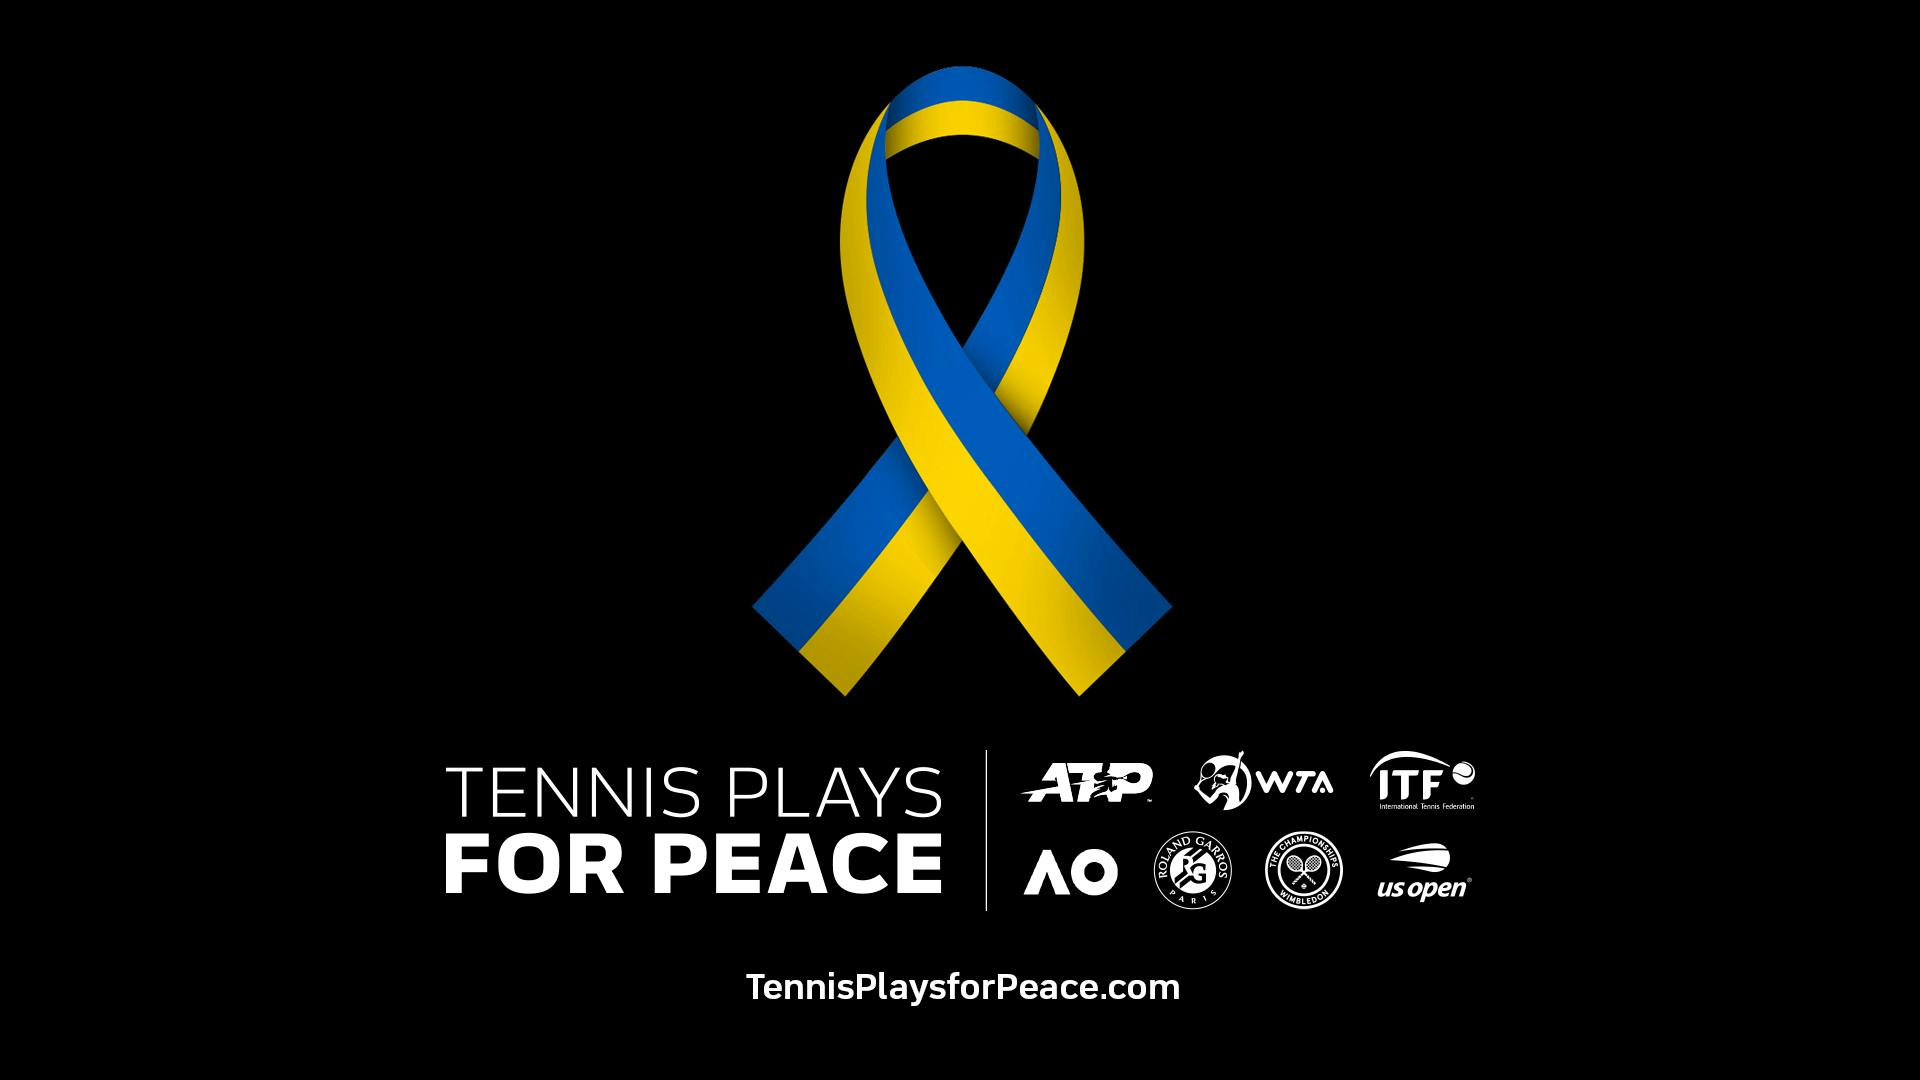 Tennis Plays for Peace